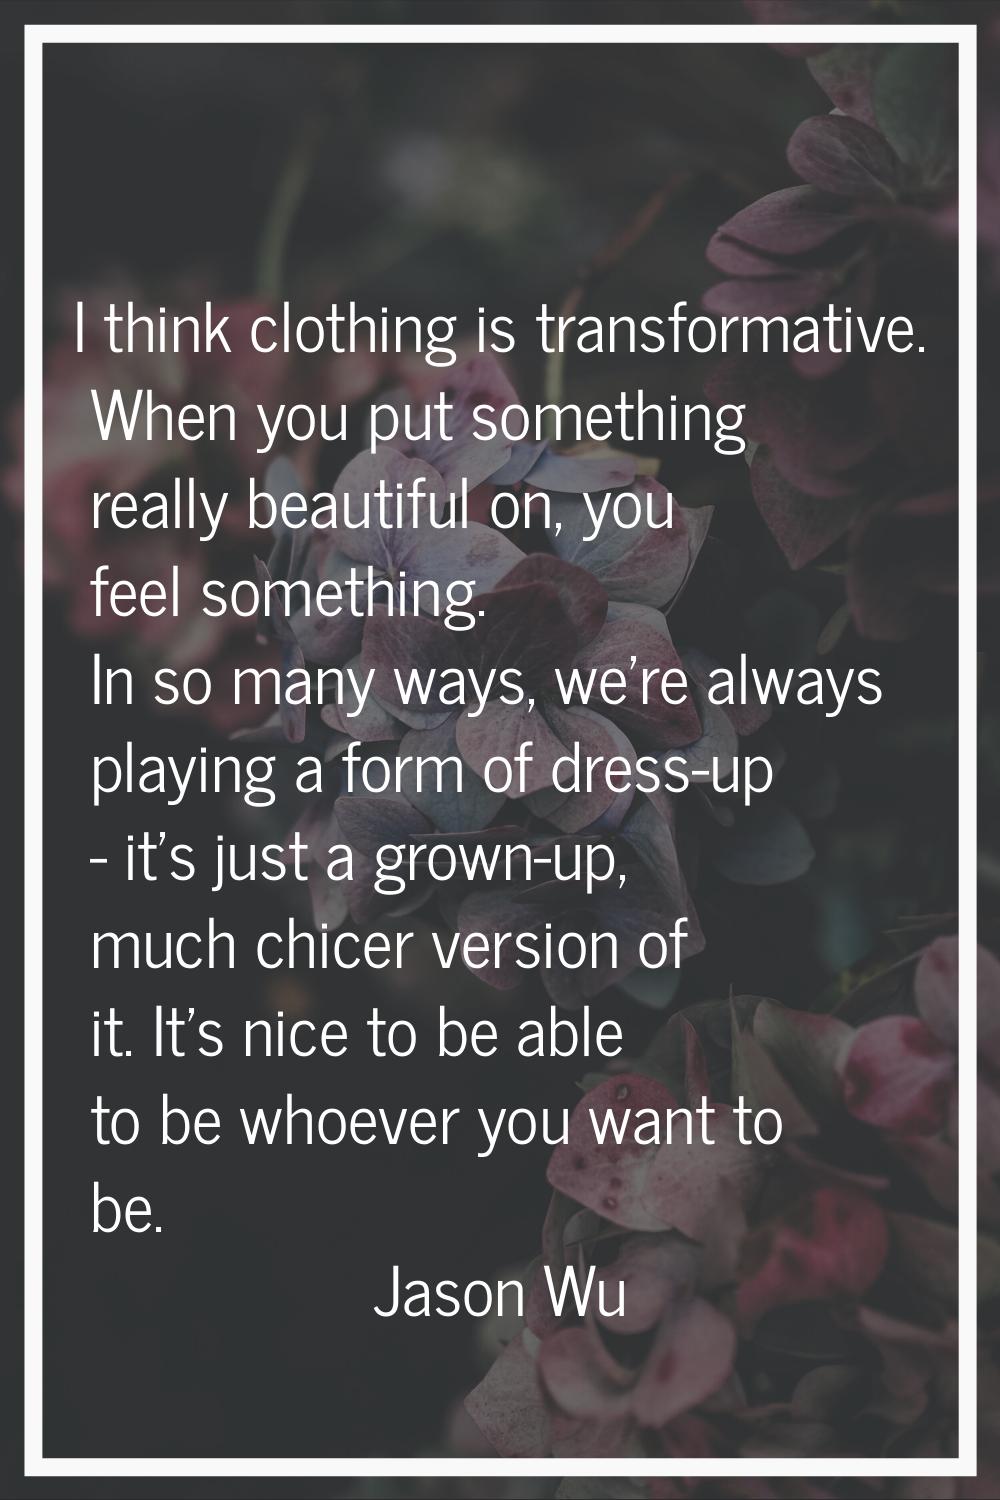 I think clothing is transformative. When you put something really beautiful on, you feel something.